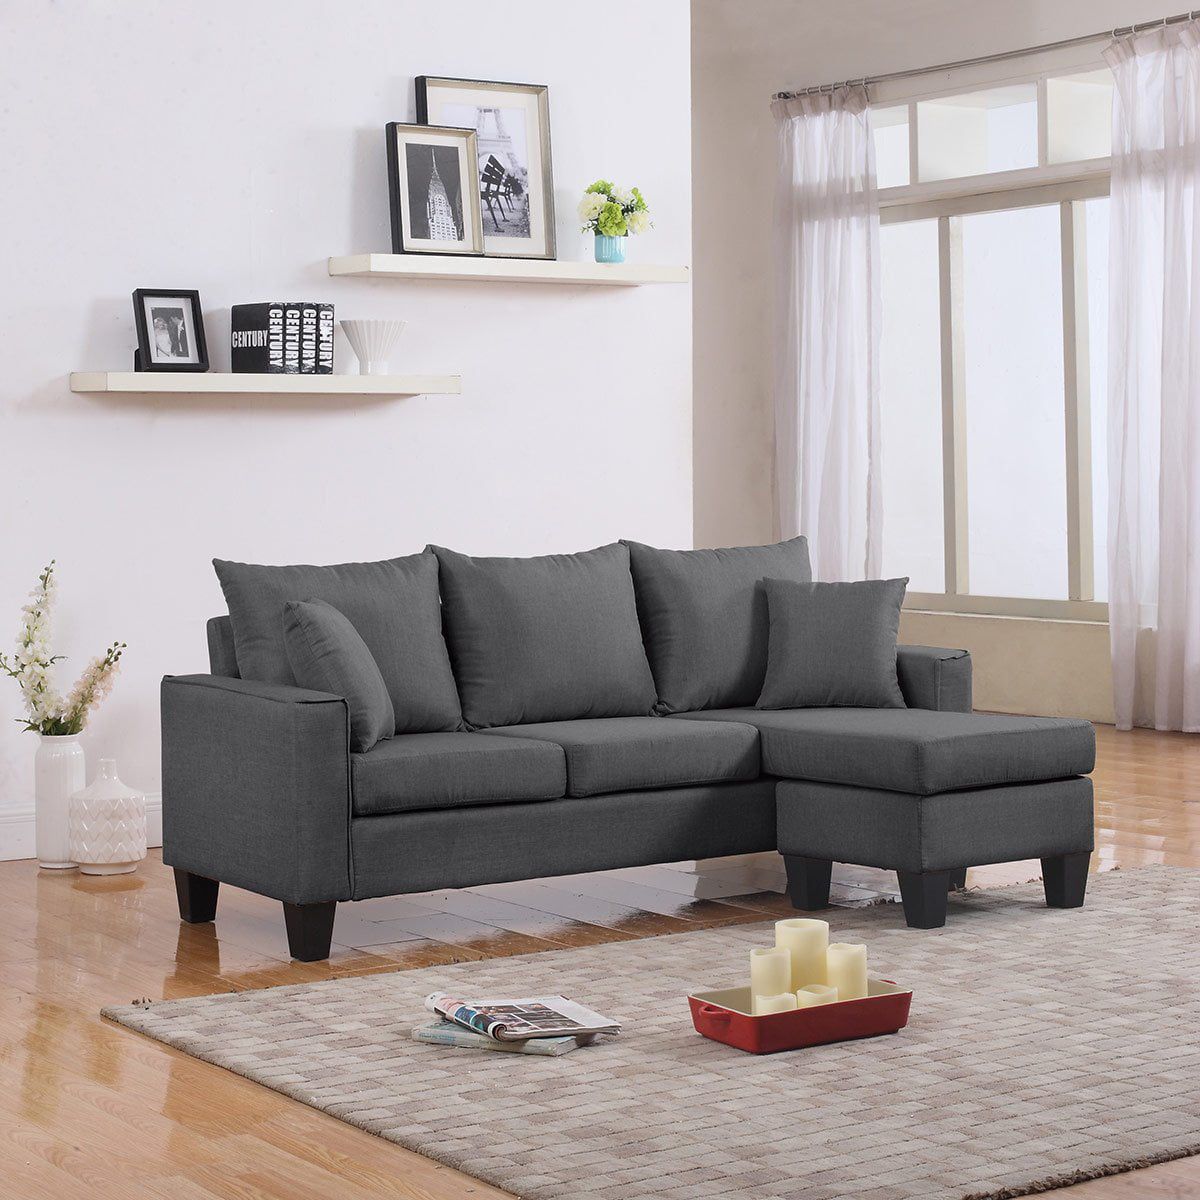 Modern Linen Fabric Small Space Sectional Sofa With Reversible Chaise Intended For Modern Light Grey Loveseat Sofas (View 20 of 20)